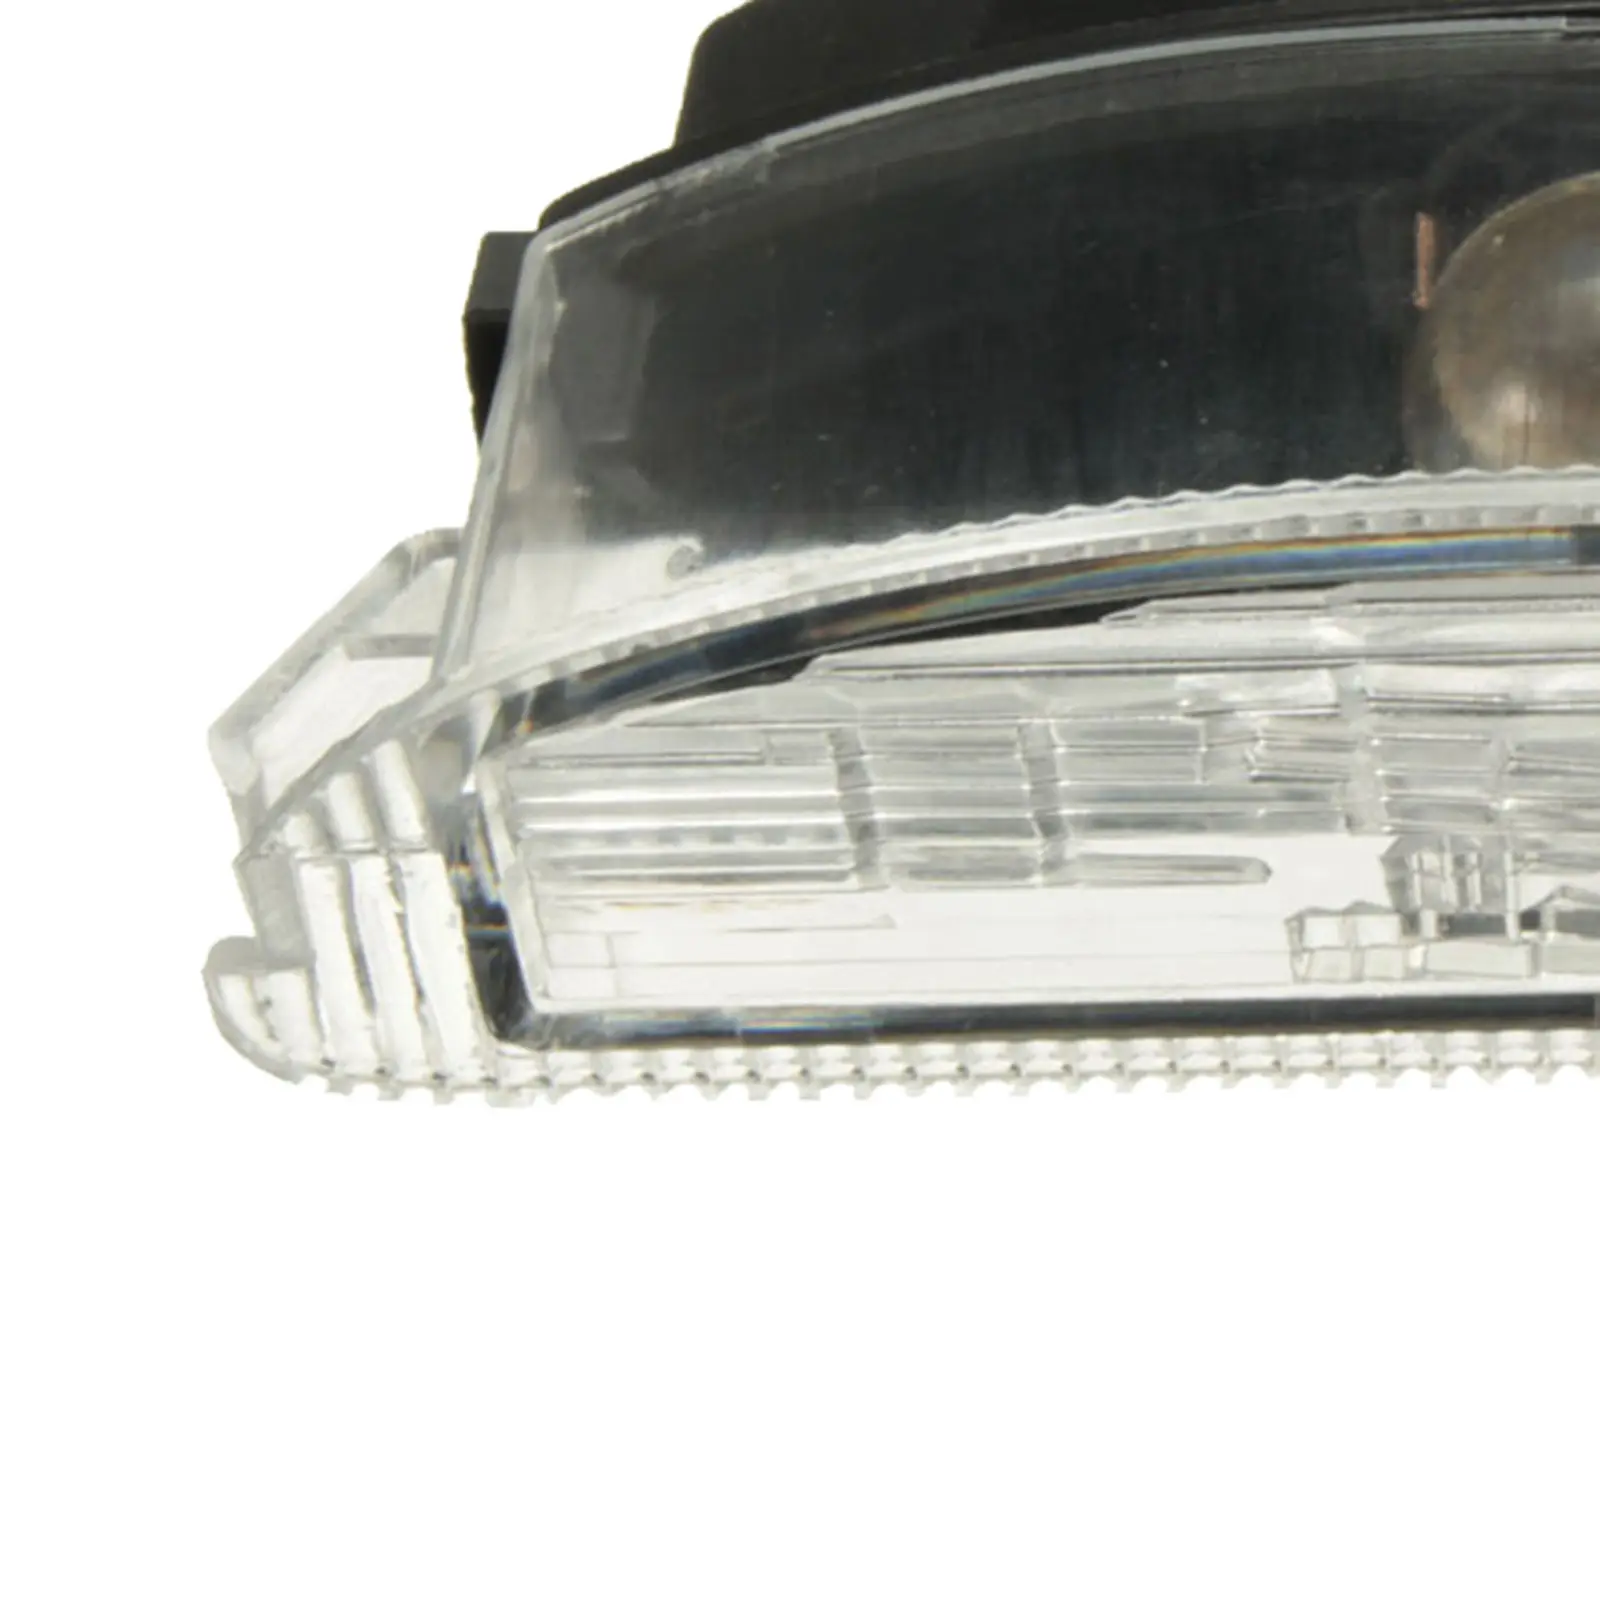 Number Plate Lamp Light 7700410754 for Clio II 98-05 Replacement Parts Acc